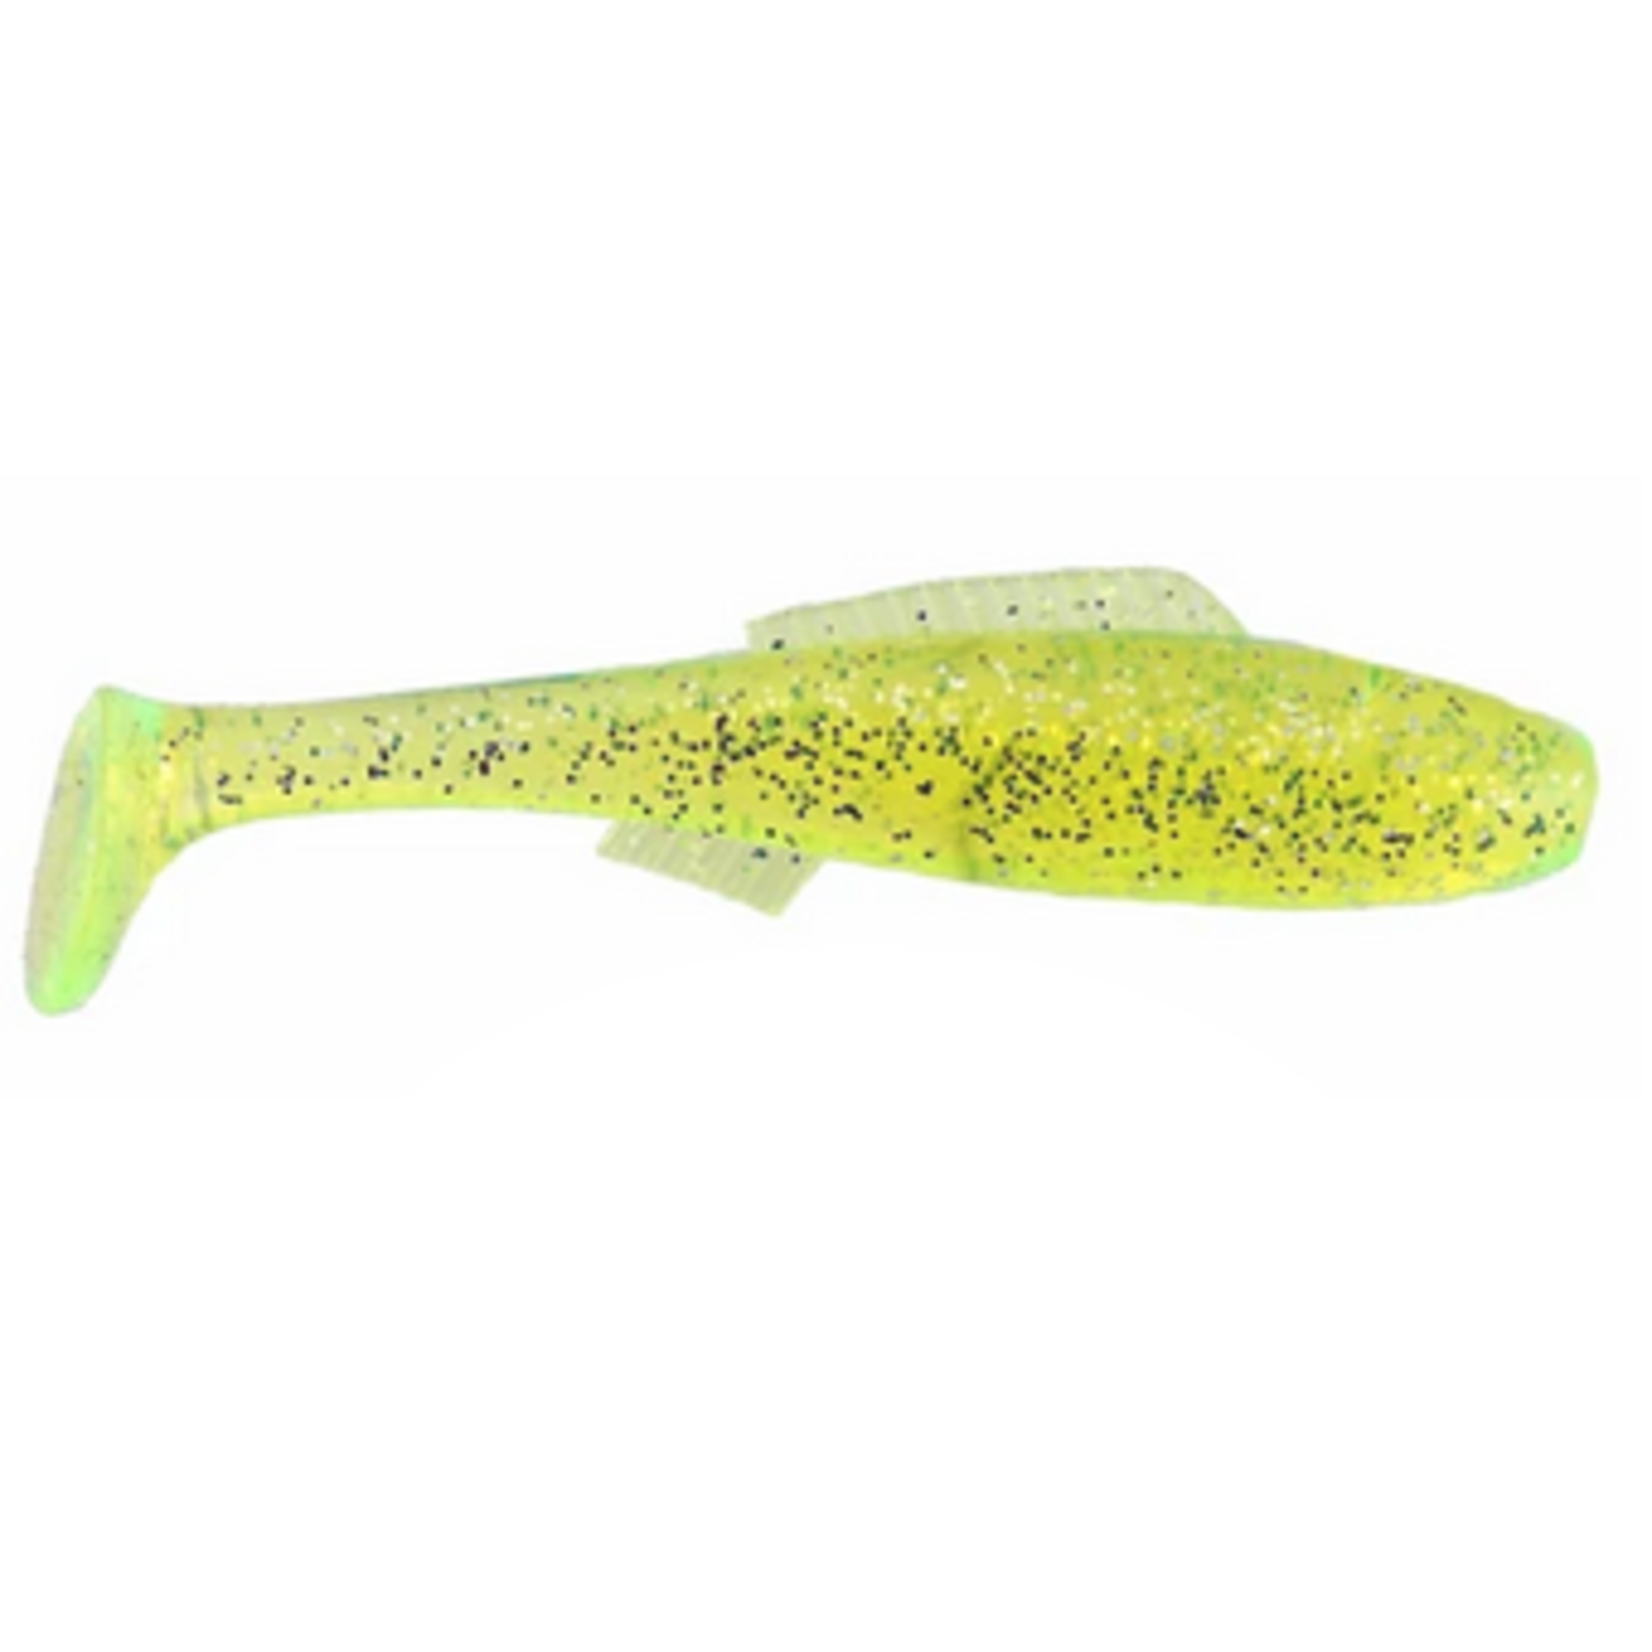 H & H | 3" Cocahoe Minnow "Chartreuse/ Glitter"